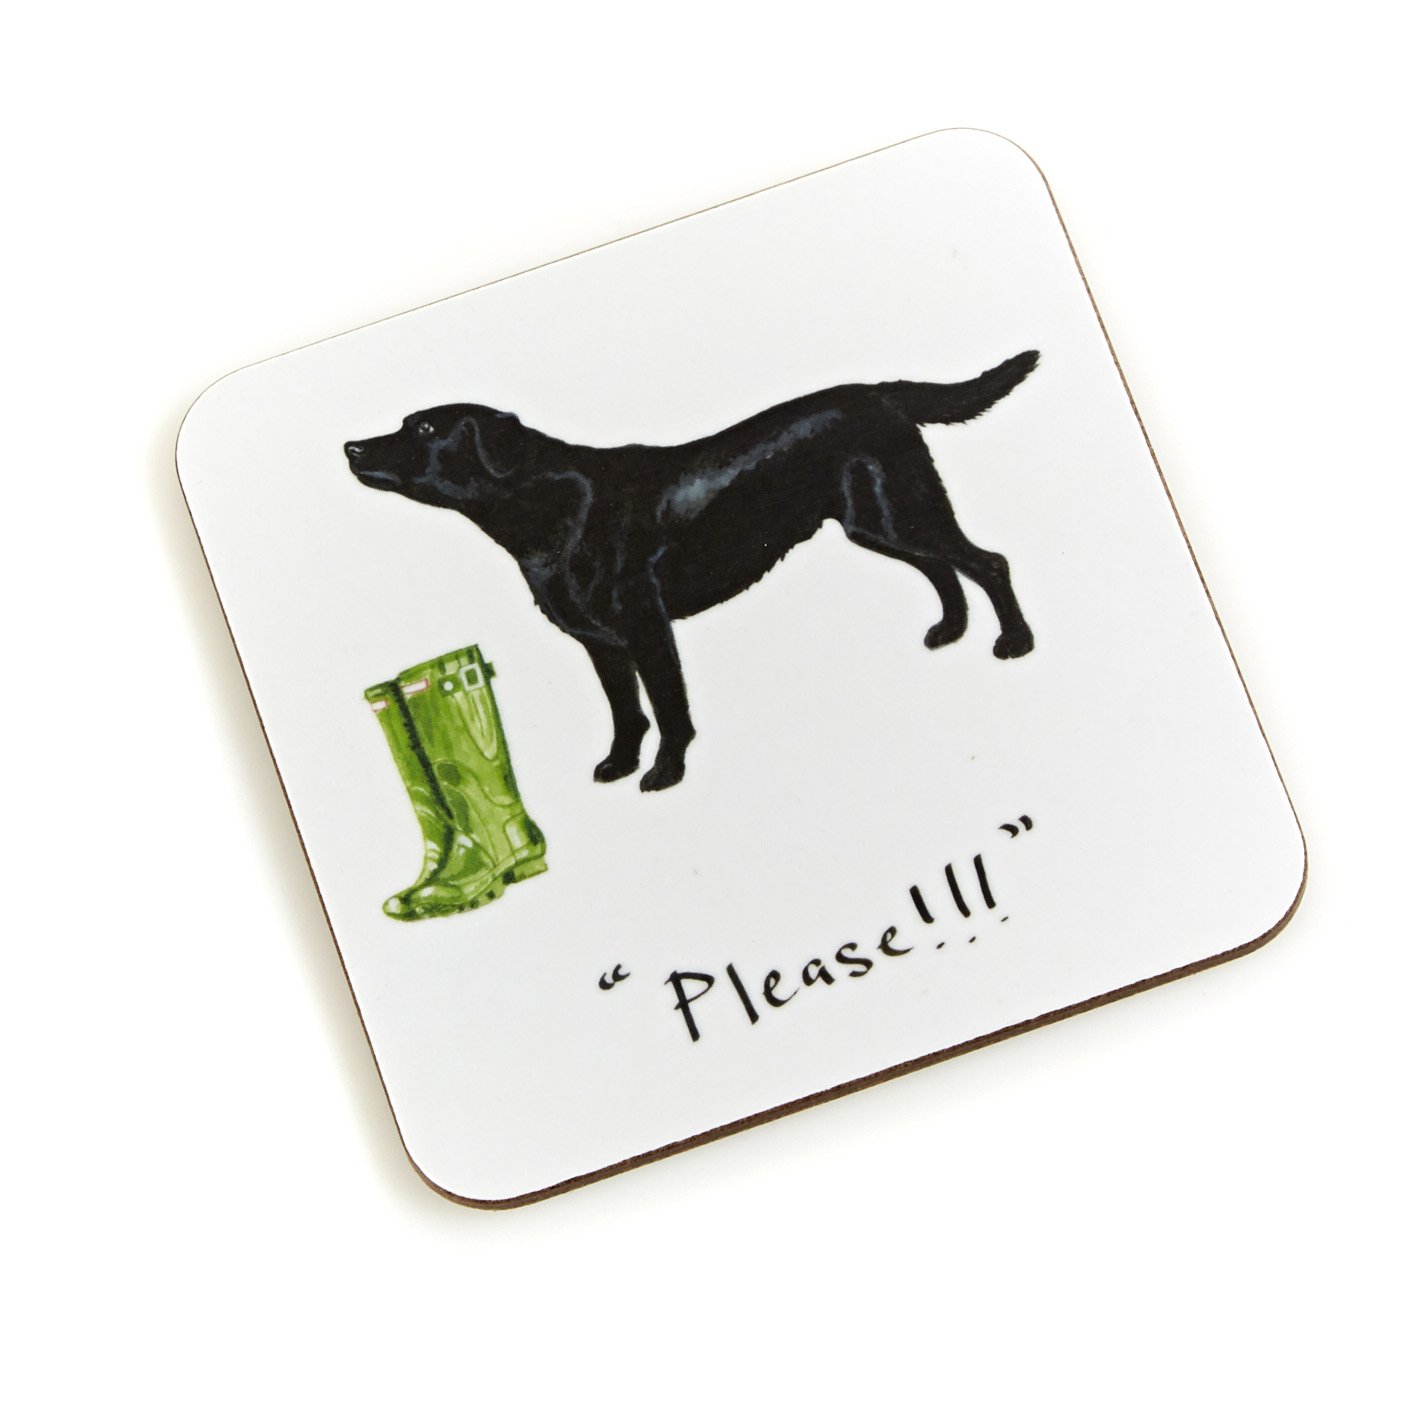 16 AT HOME IN THE COUNTRY Posh Cow! &amp; Black Labrador Coasters €4.56 each,  